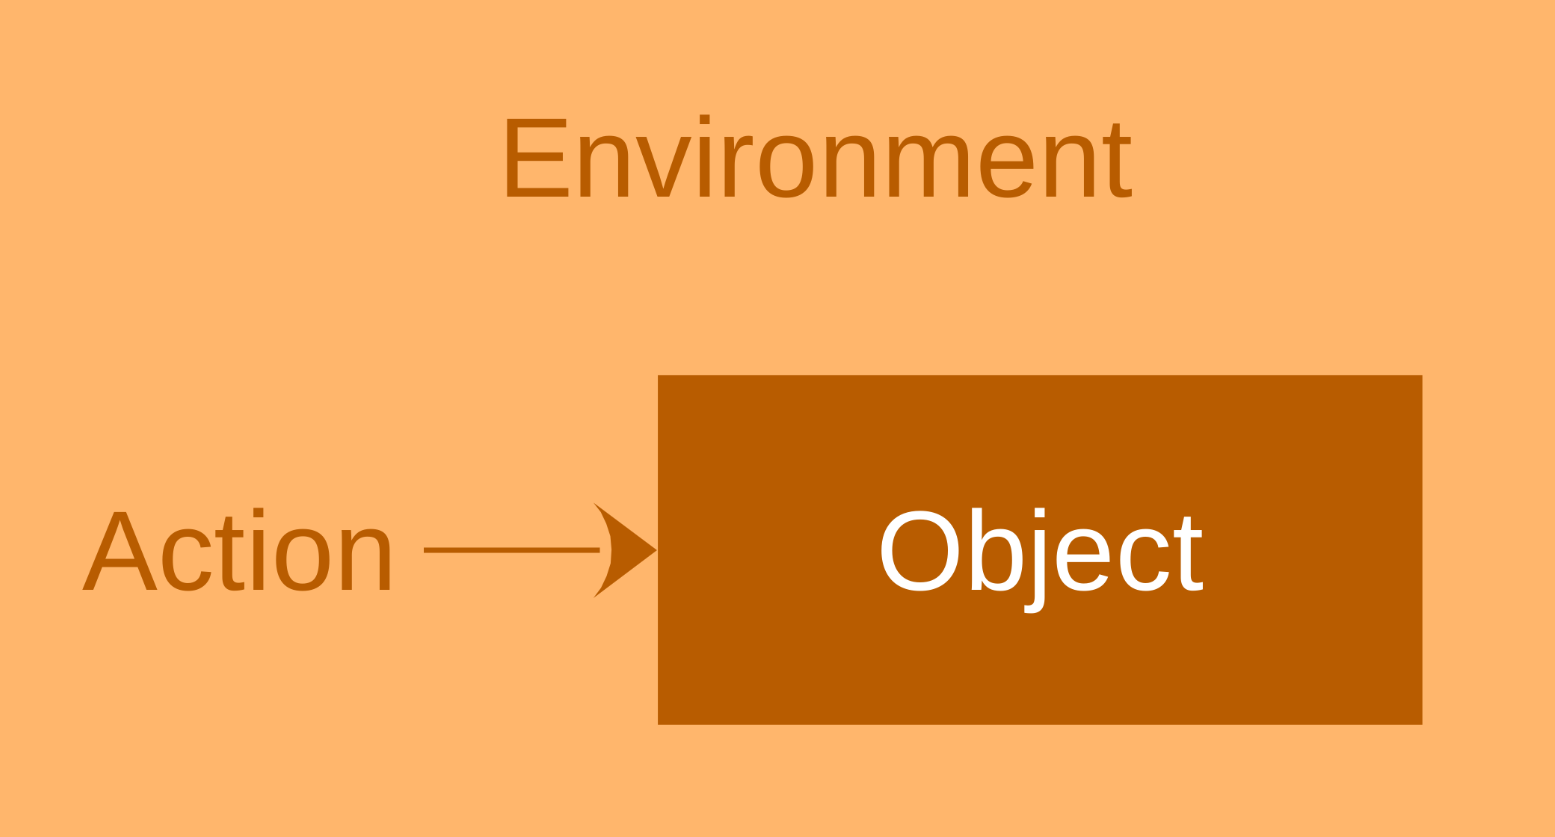 Illustration of action, object, and environment